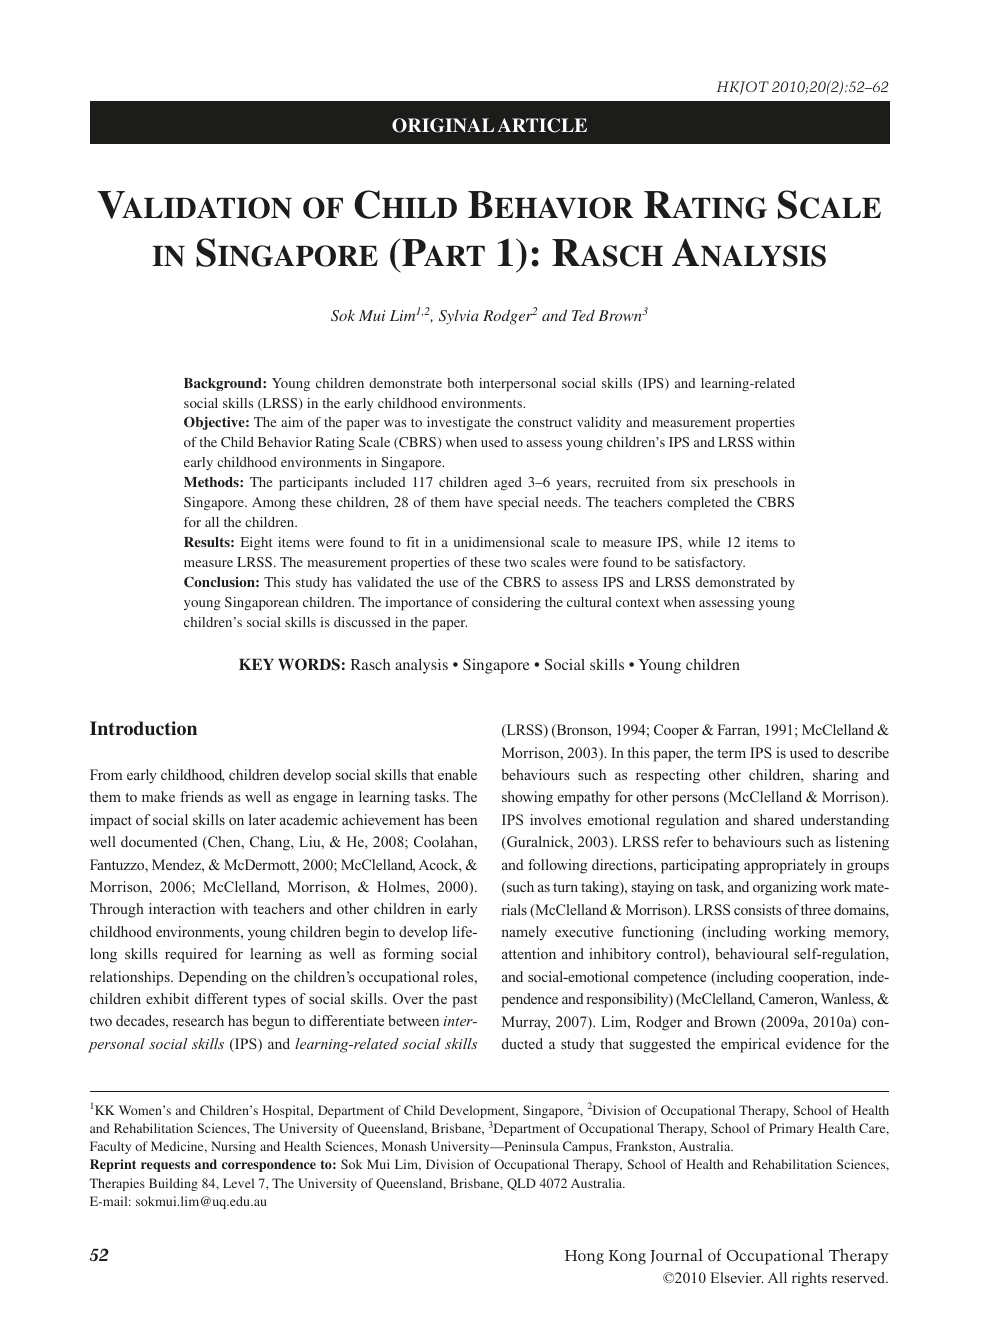 Validation Of Child Behavior Rating Scale In Singapore Part - 